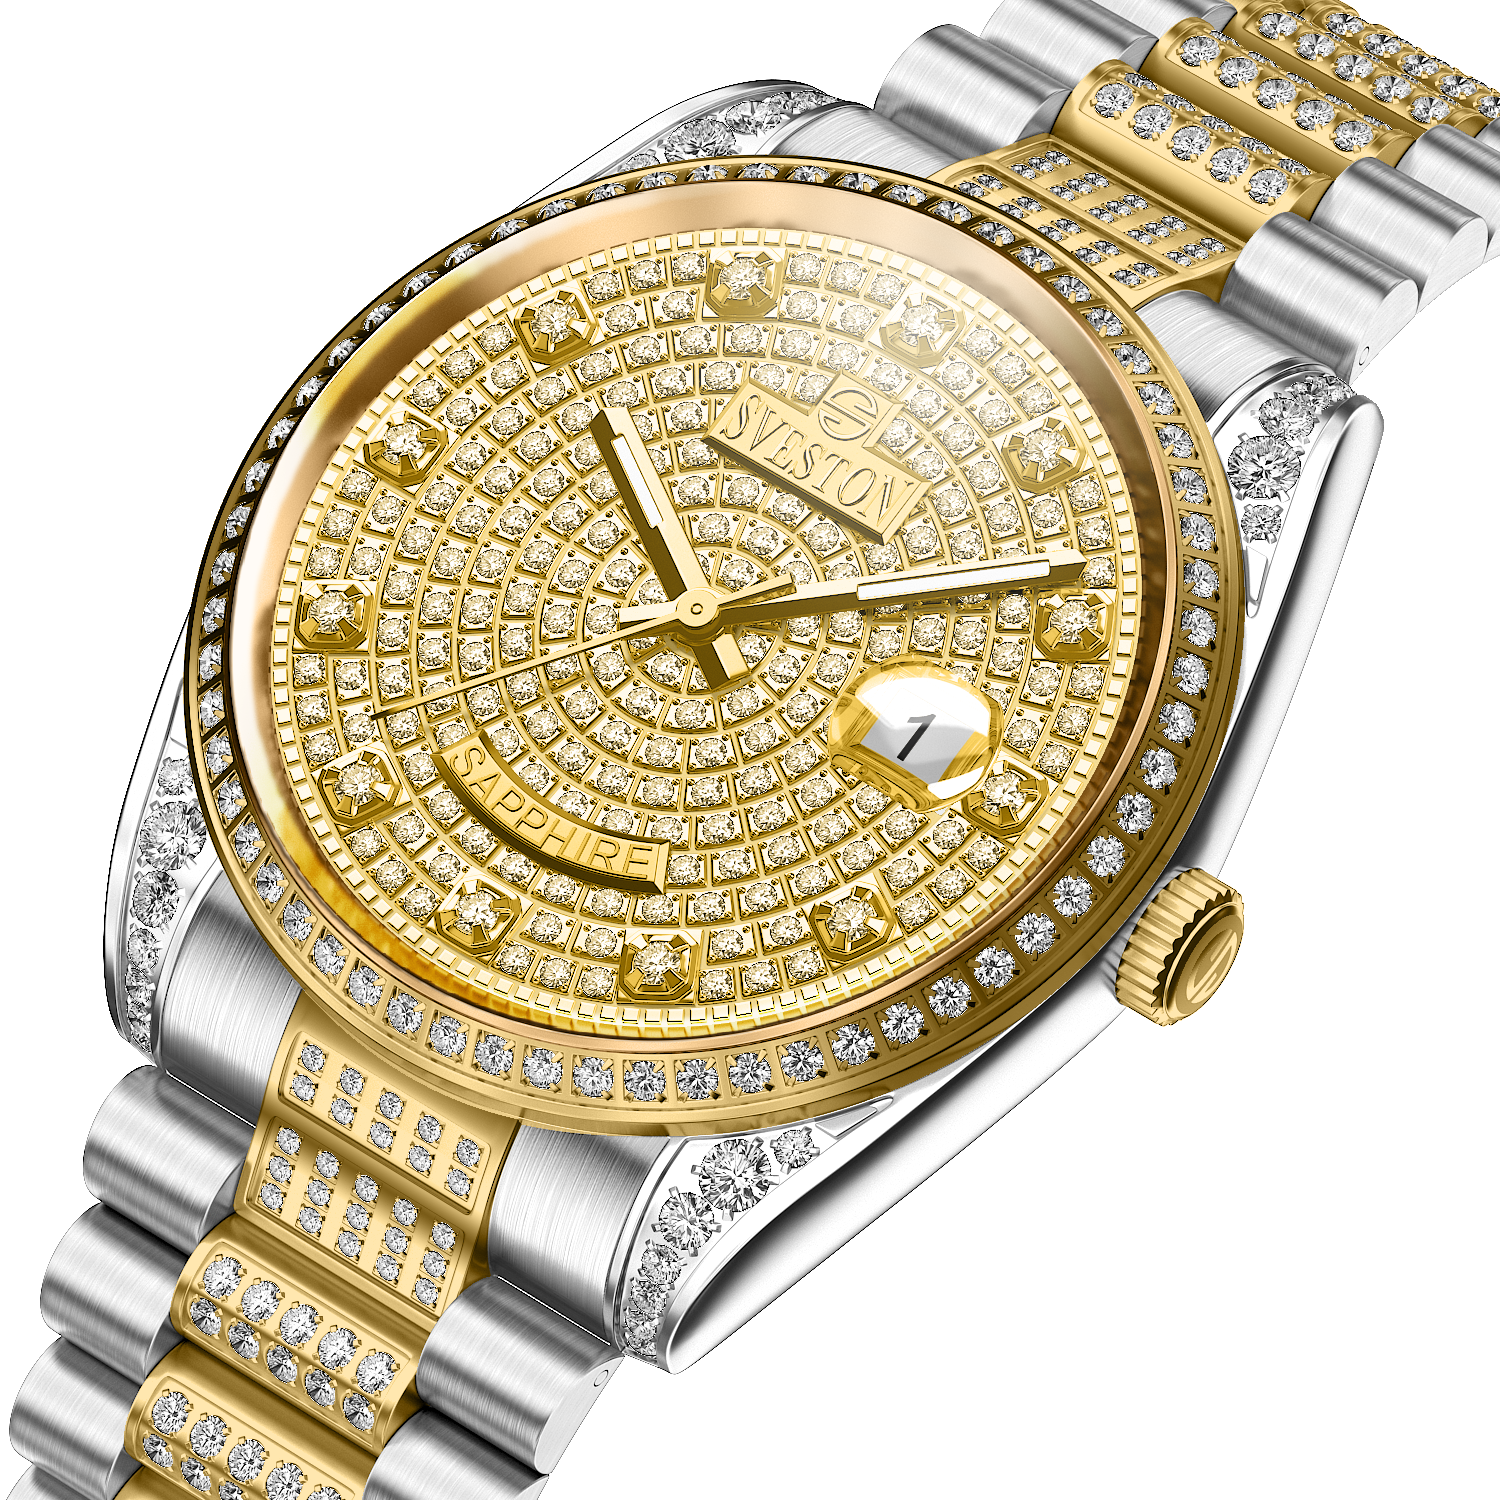 Buy Trendy Women's Wrist Watches - Upgrade Your Look with Extra Quality